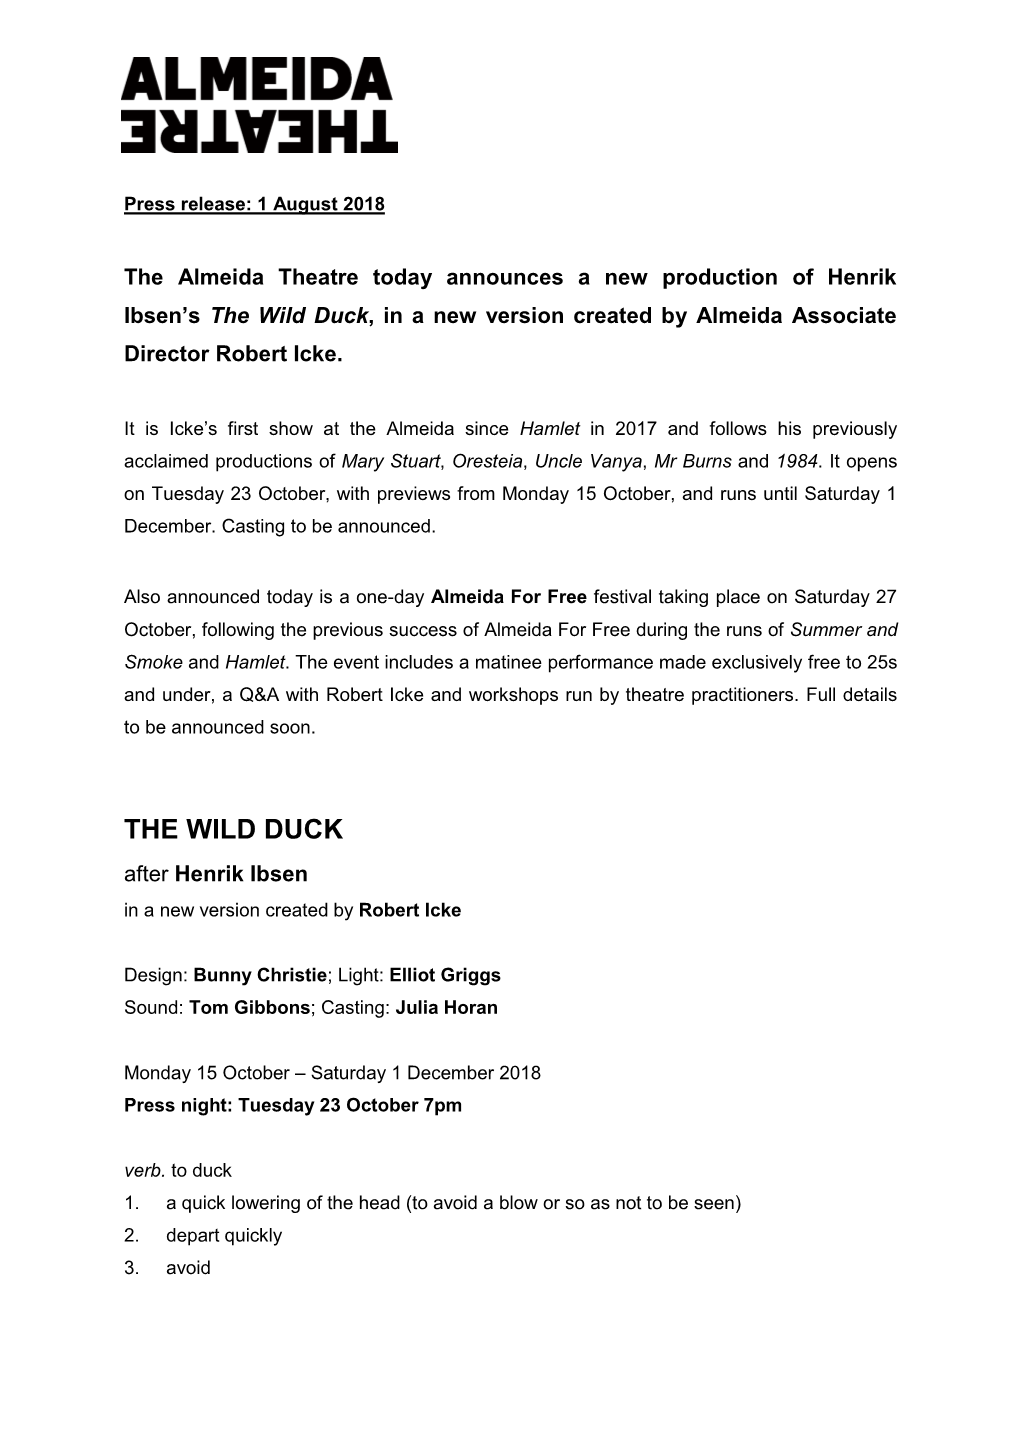 The Wild Duck, in a New Version Created by Almeida Associate Director Robert Icke